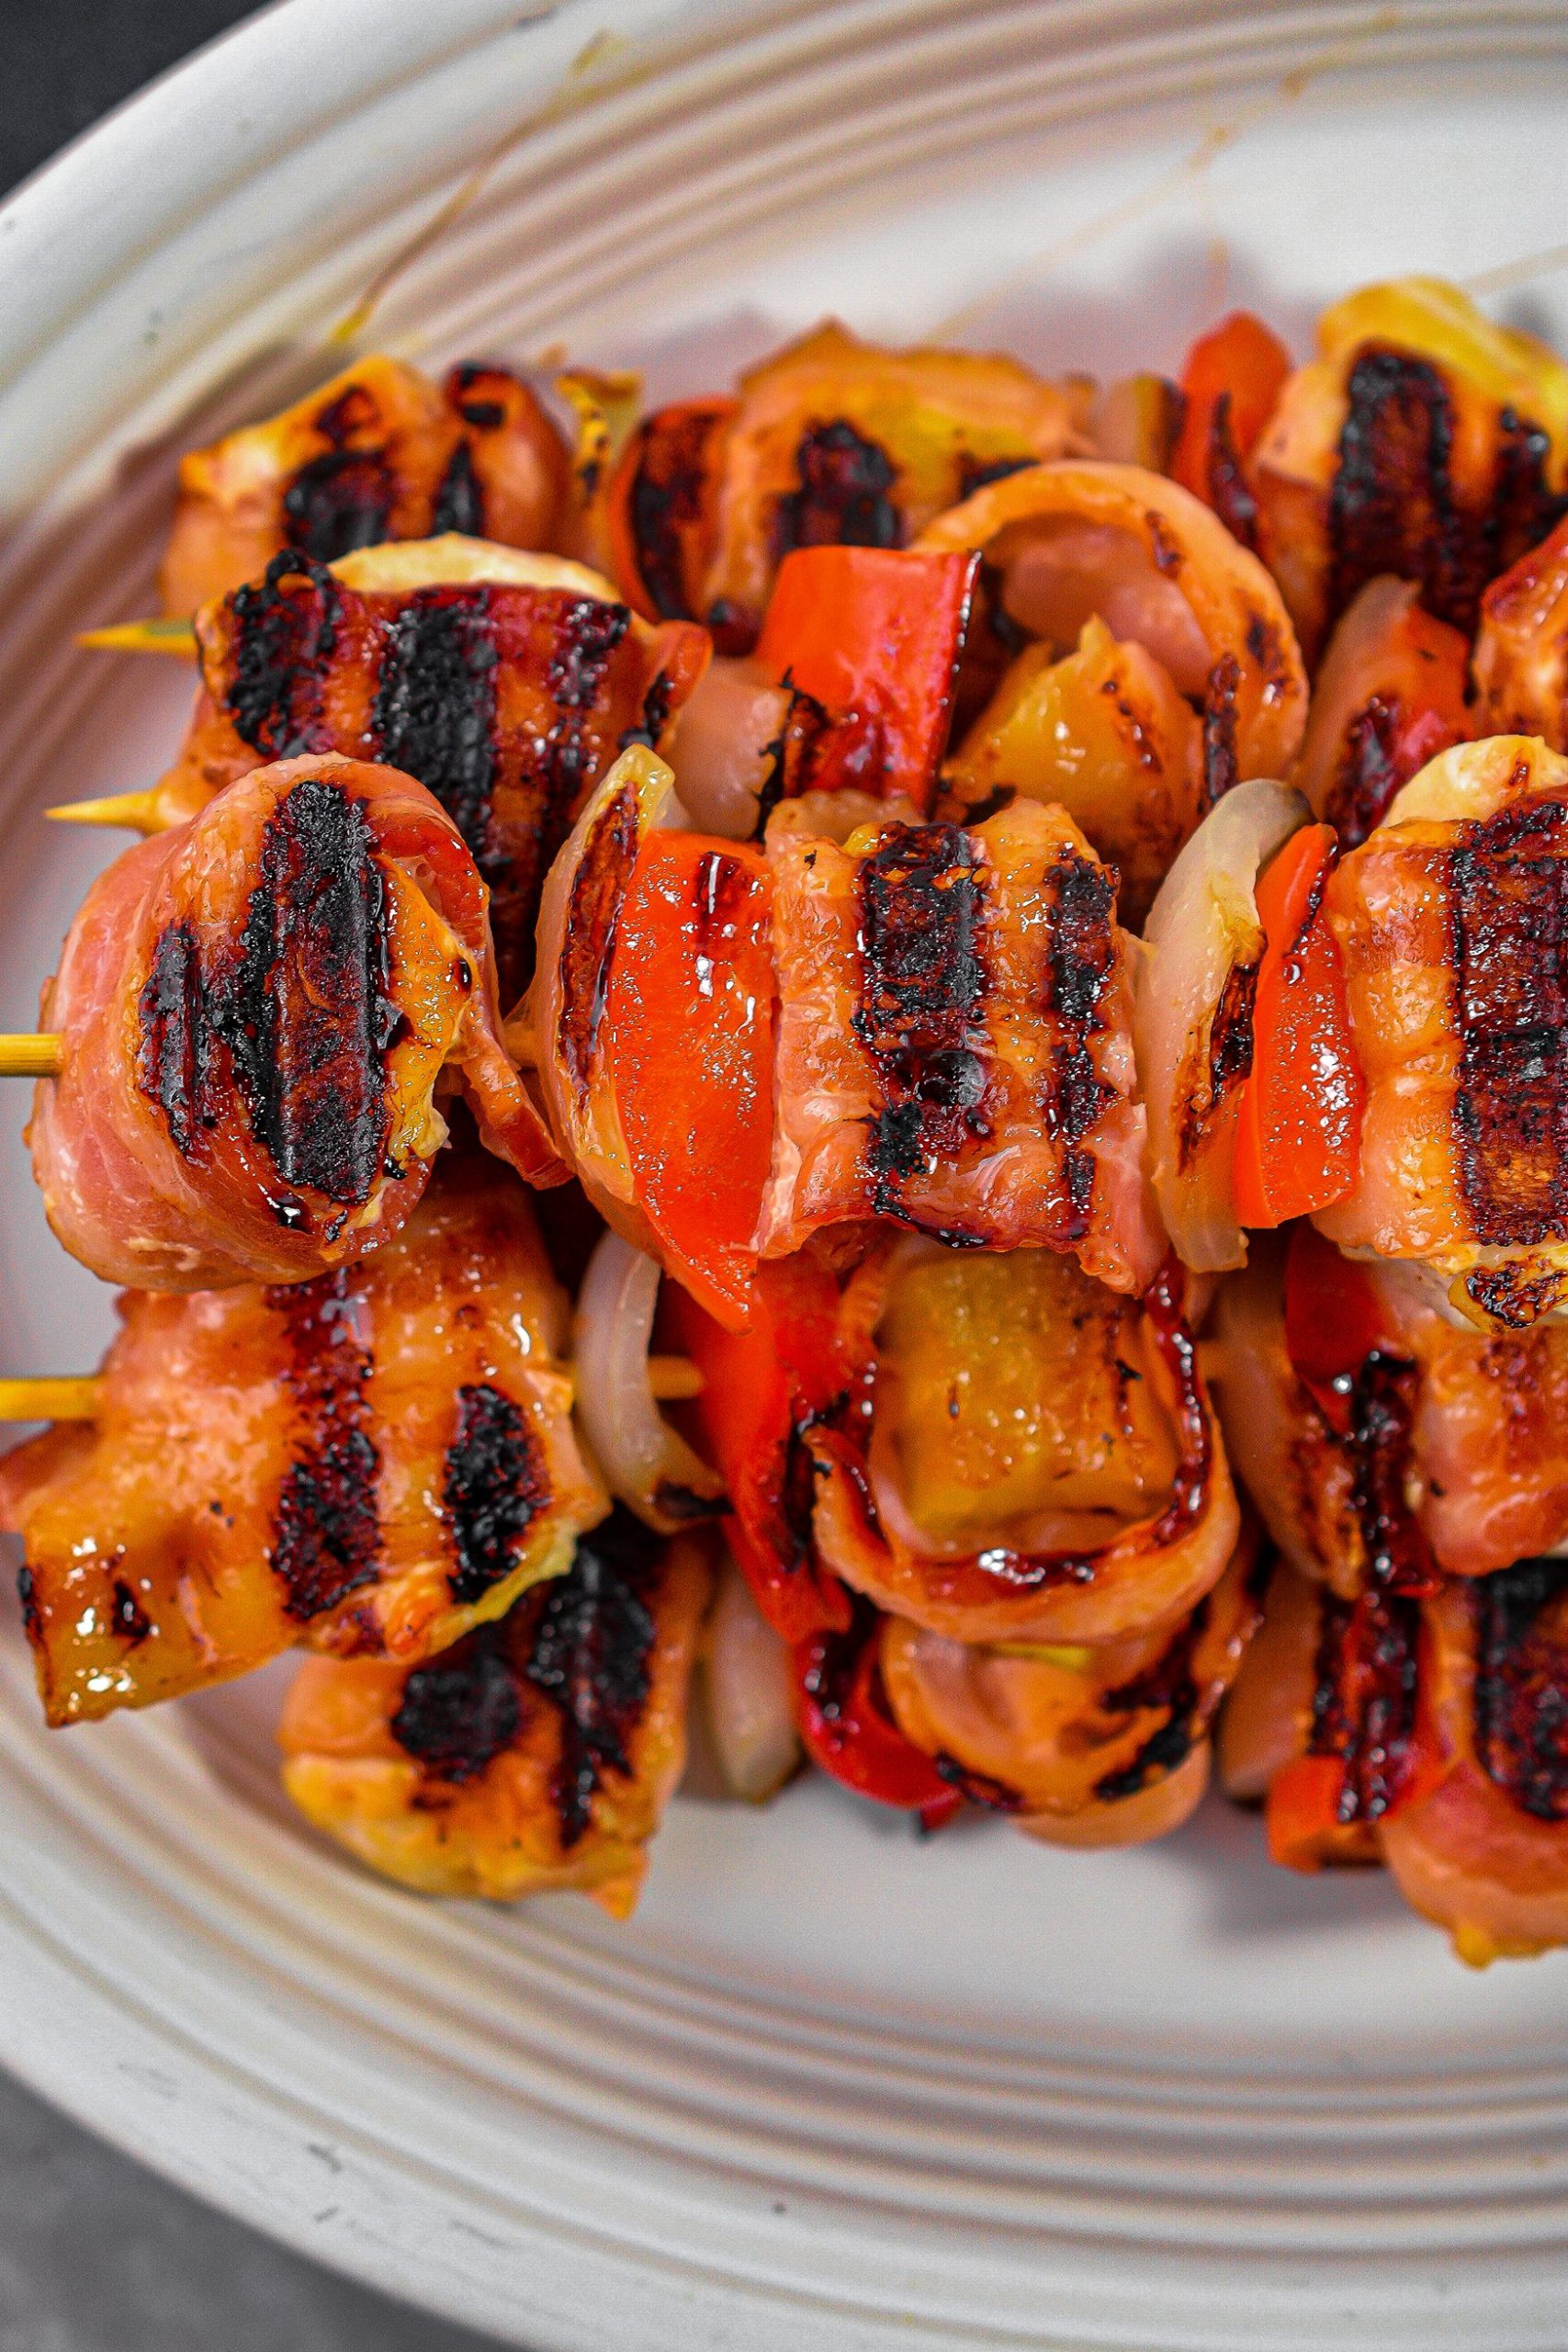 Chicken, Bacon, Pineapple Kebabs